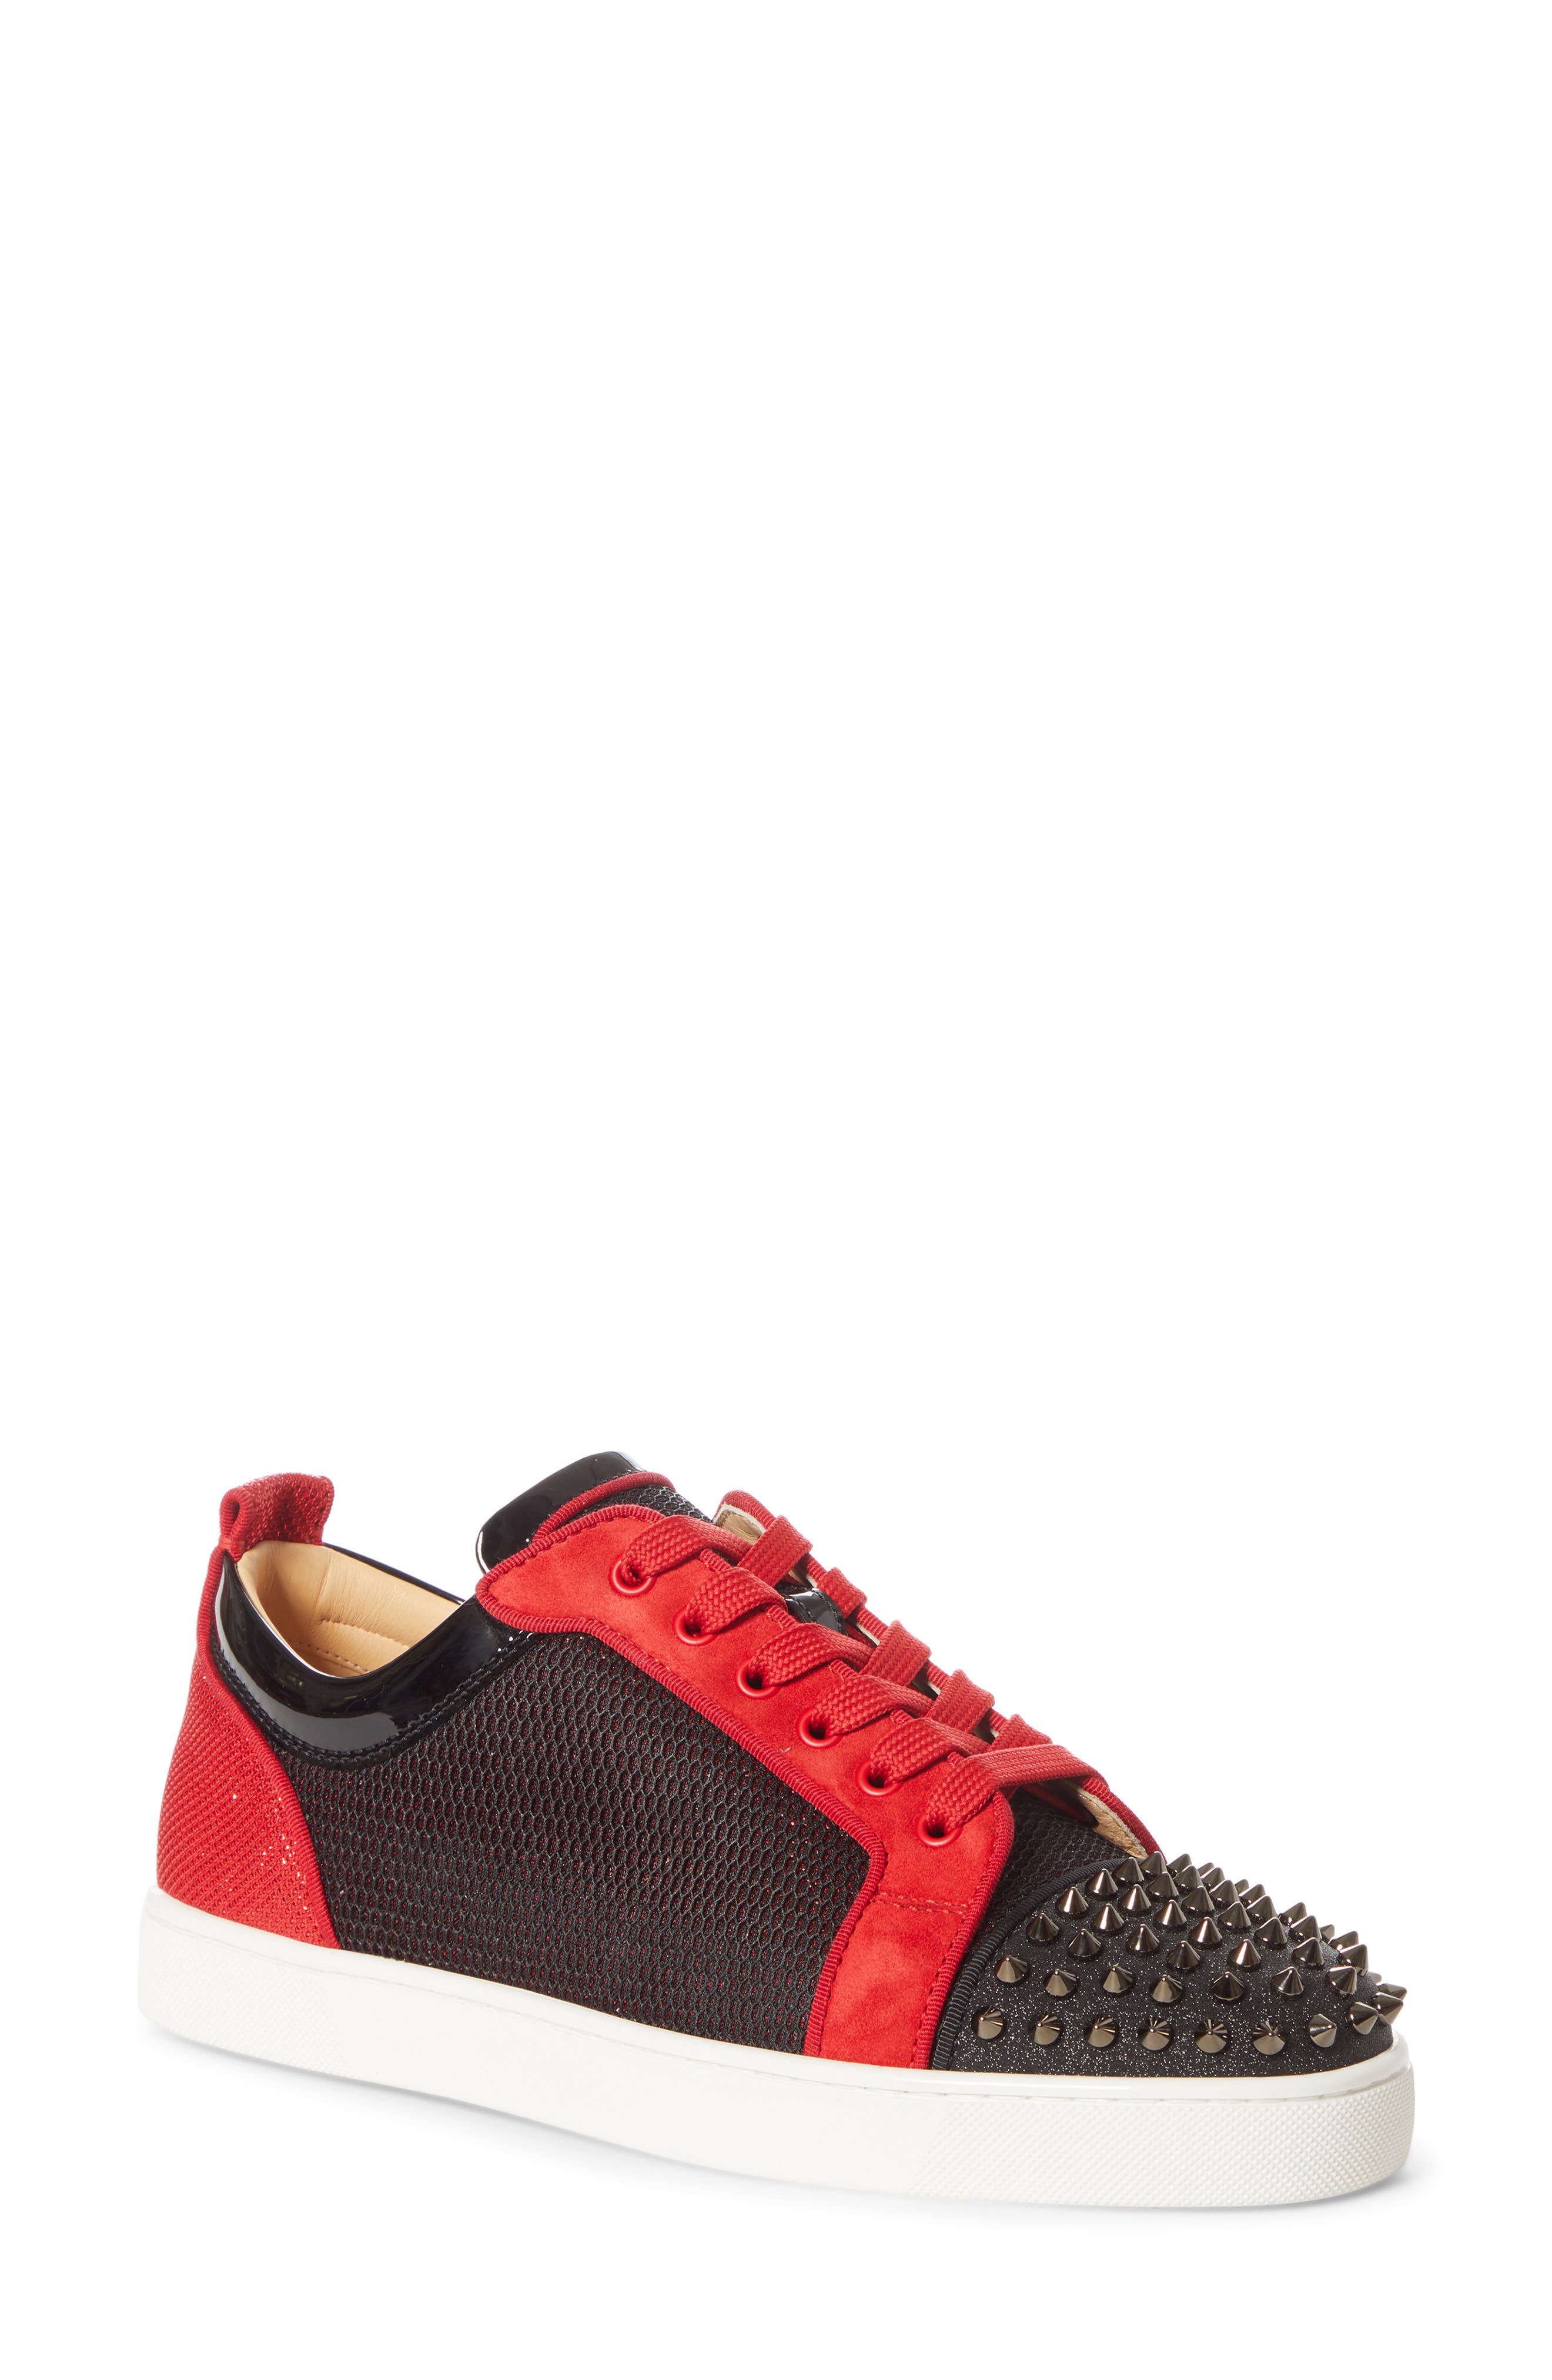 christian louboutin mens shoes price